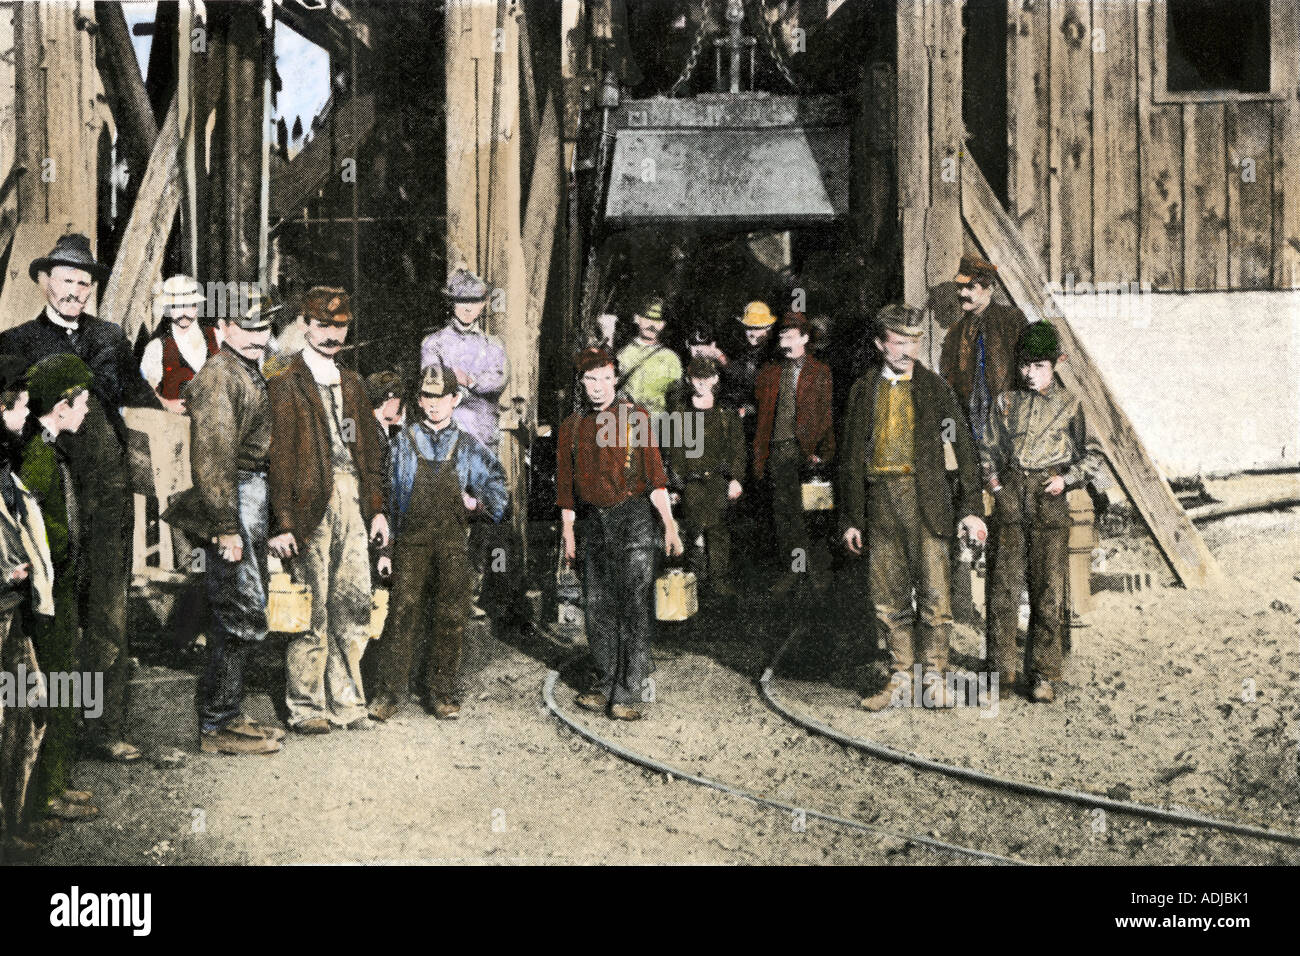 Coal miners emerging from the mine shaft after their nine hours of toil are ended in the early 1900s. Hand-colored halftone of a photograph Stock Photo